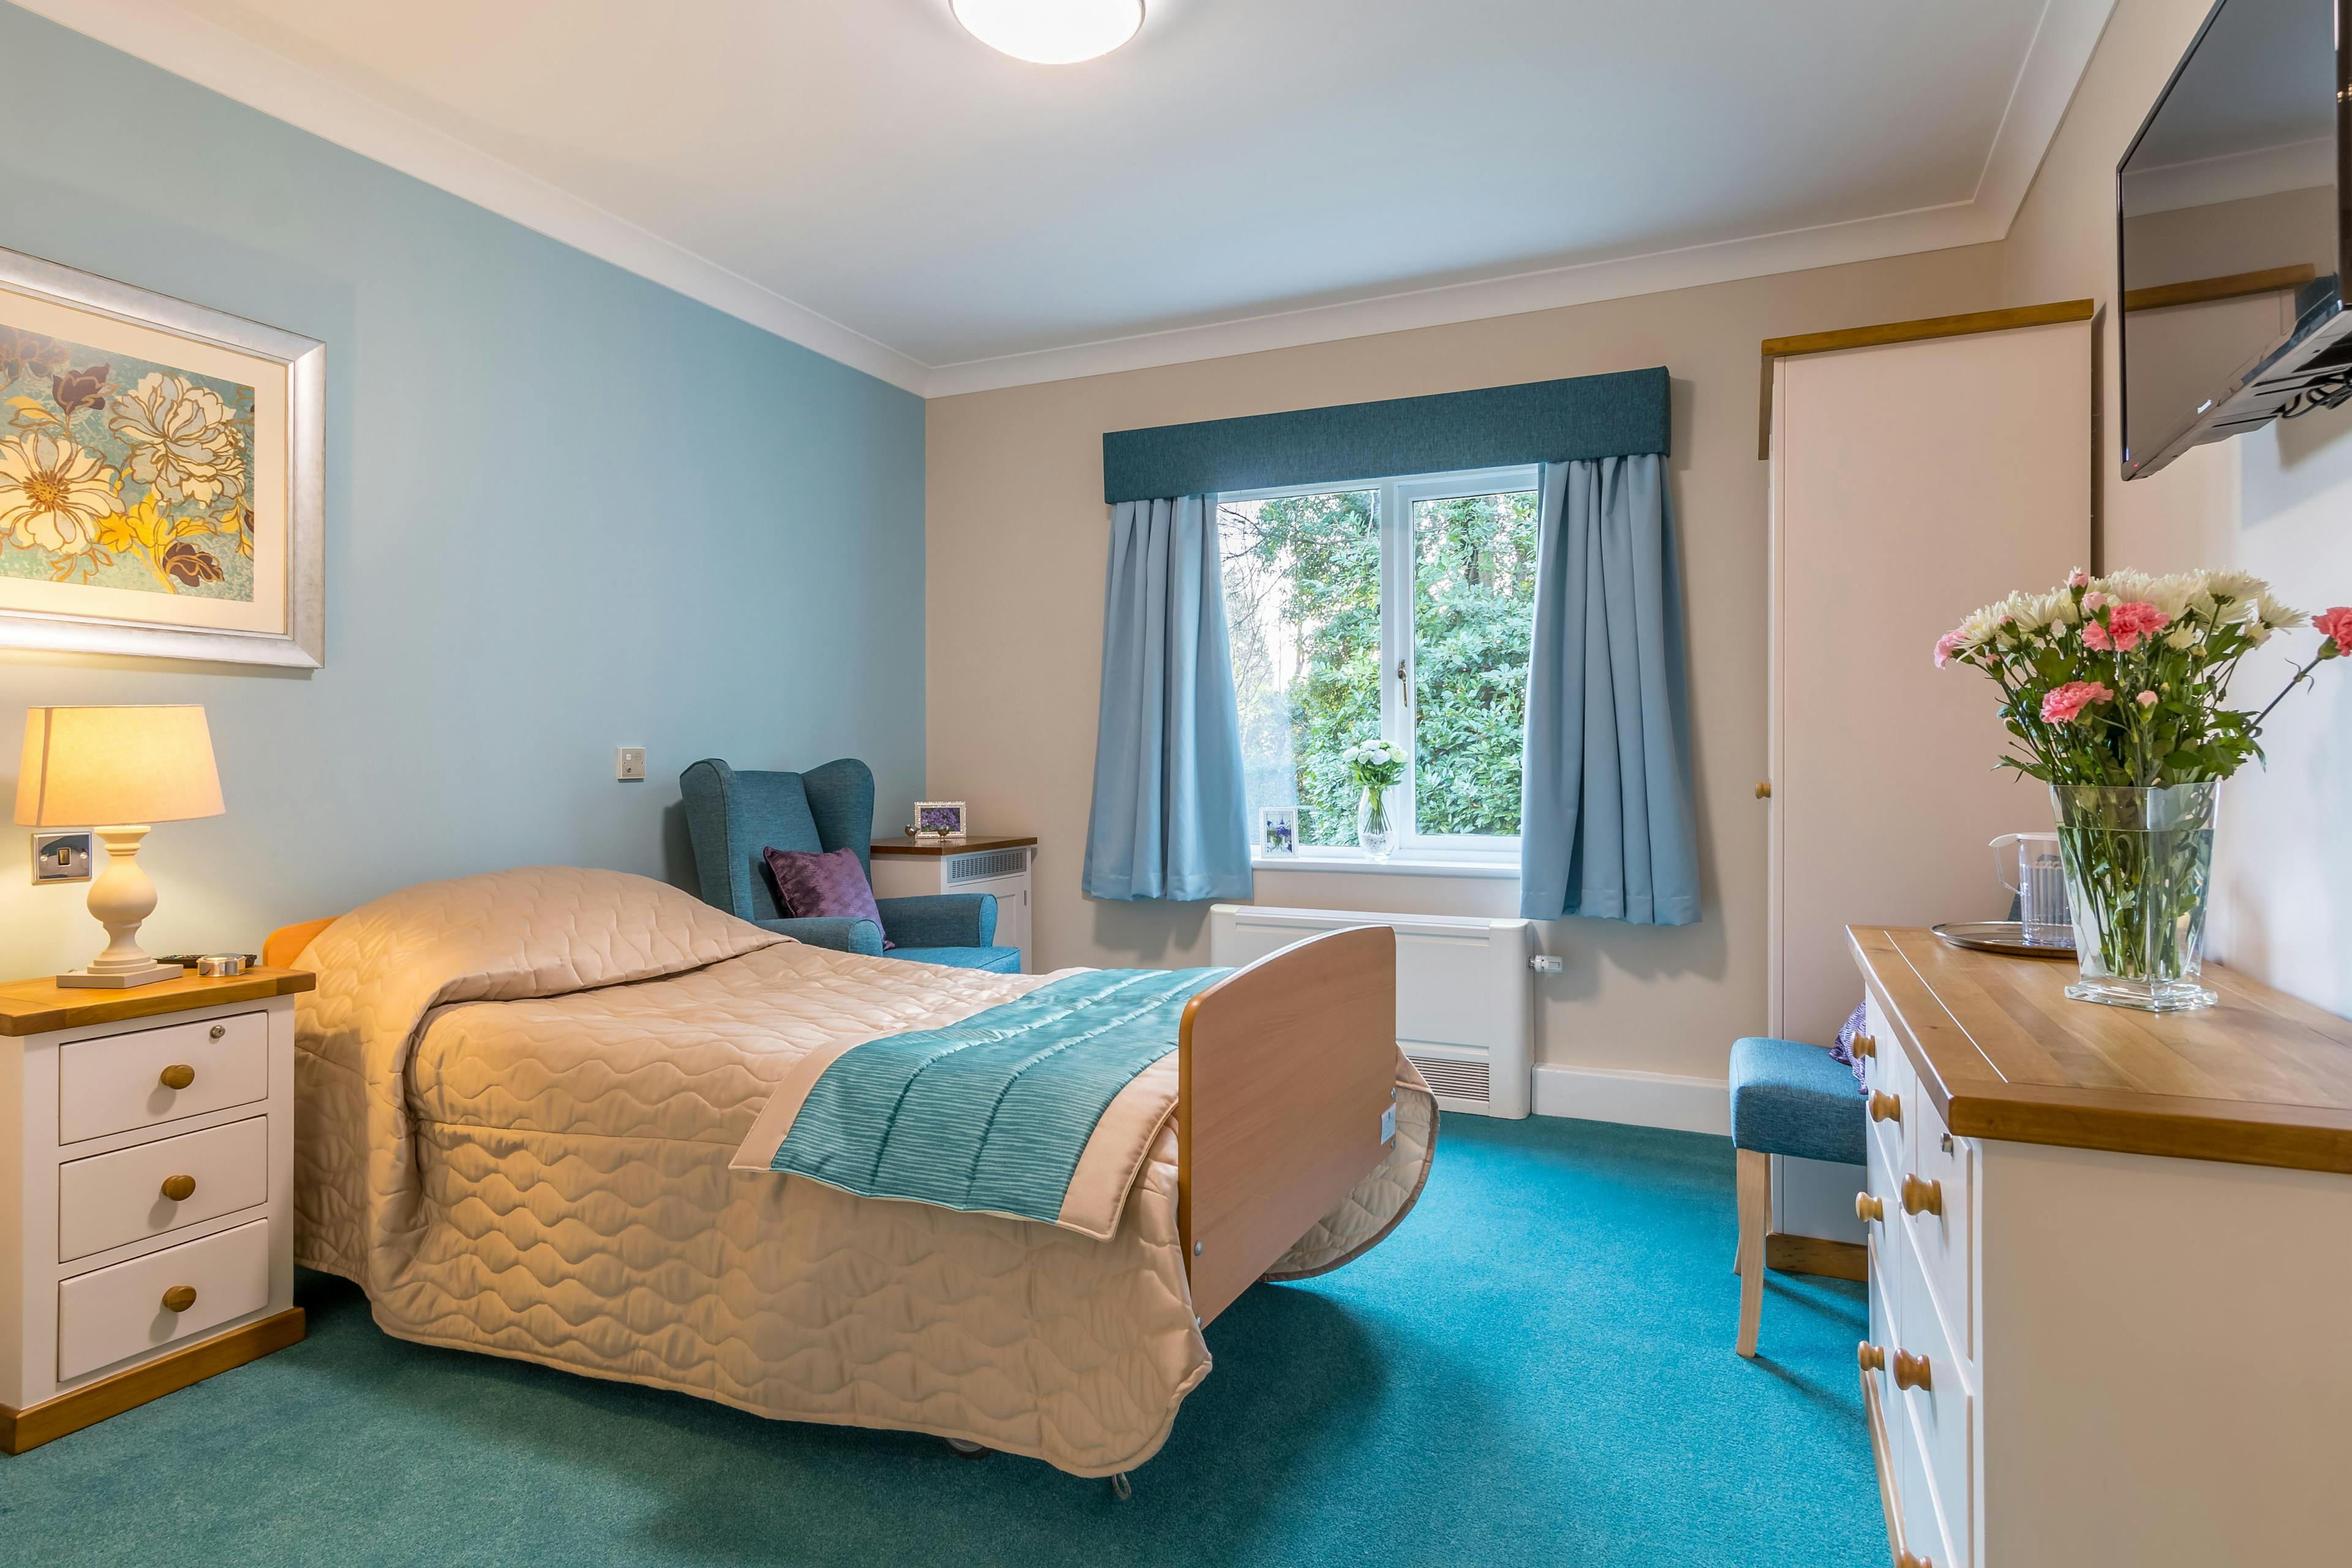 Bedroom at Overslade House Care Home in Rugby, Warwickshire